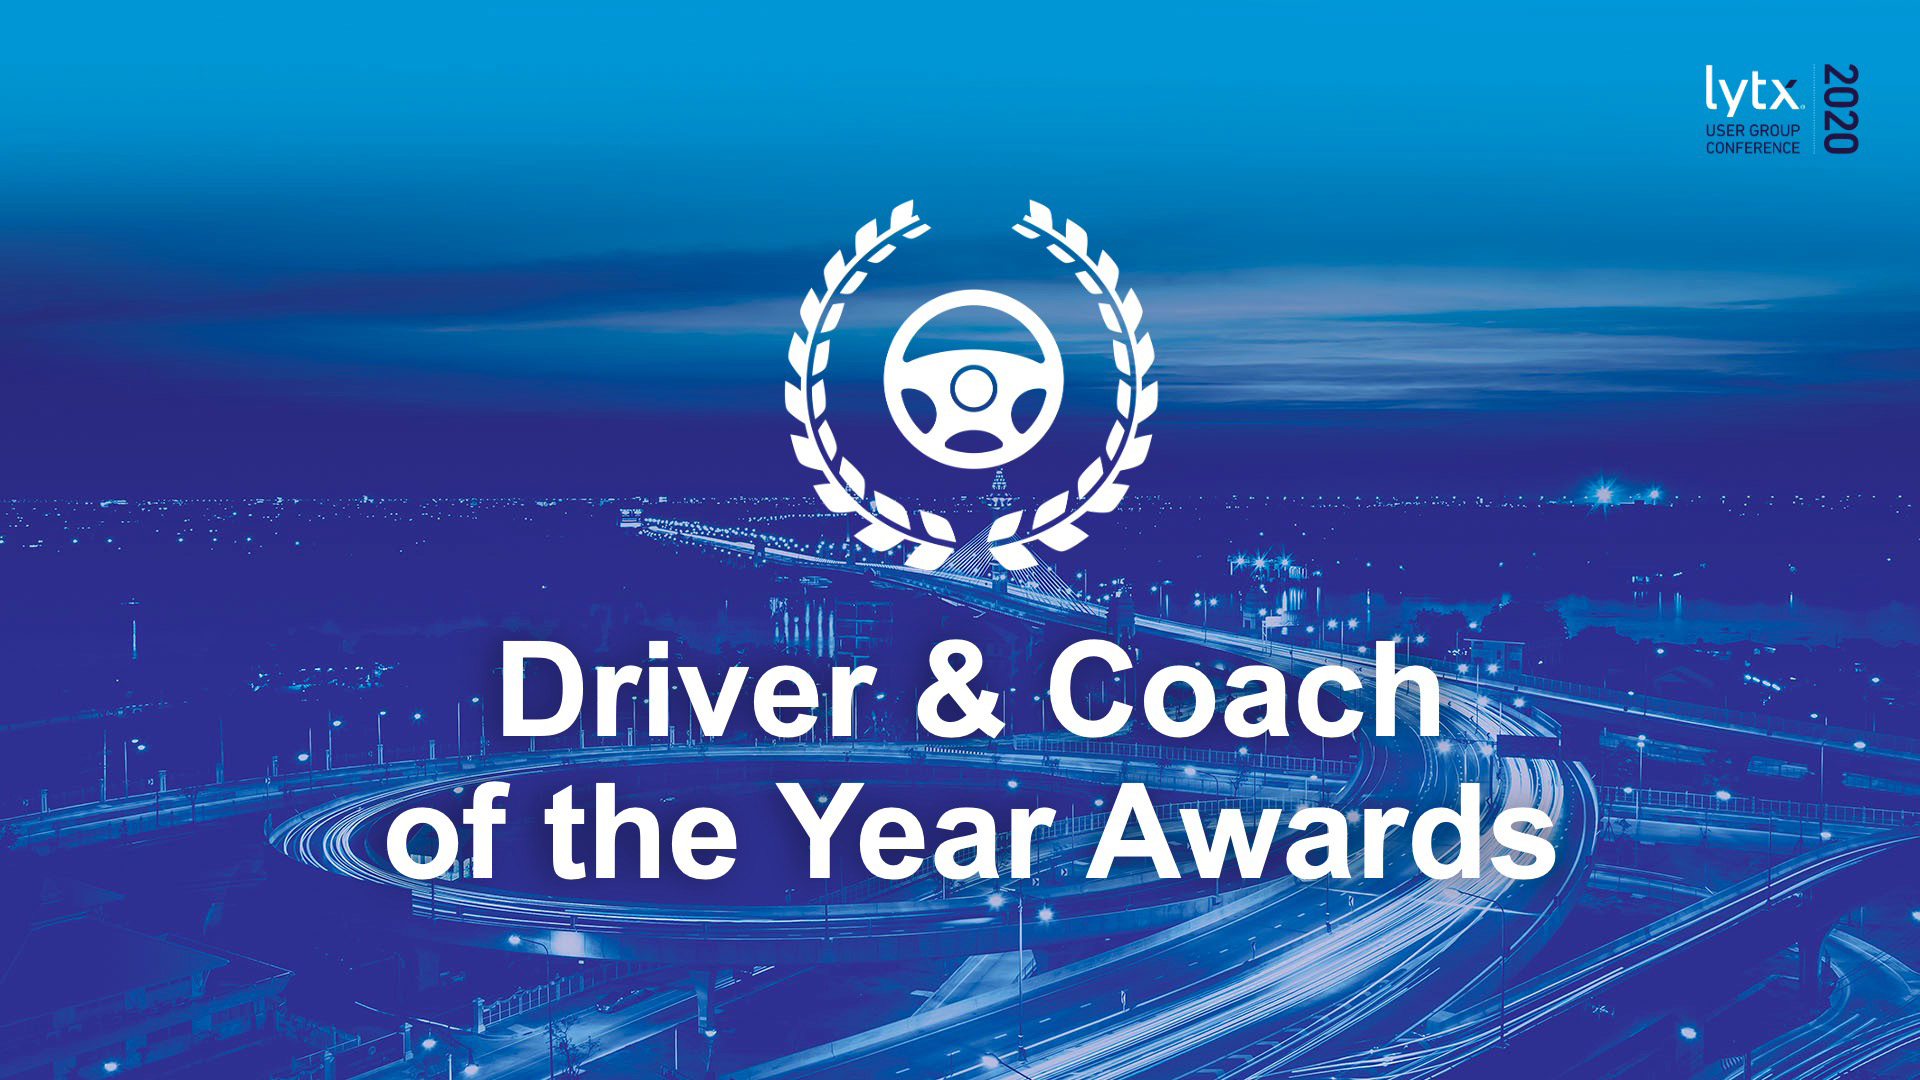 Lytx 2020 Driver & Coach of the Year Awards